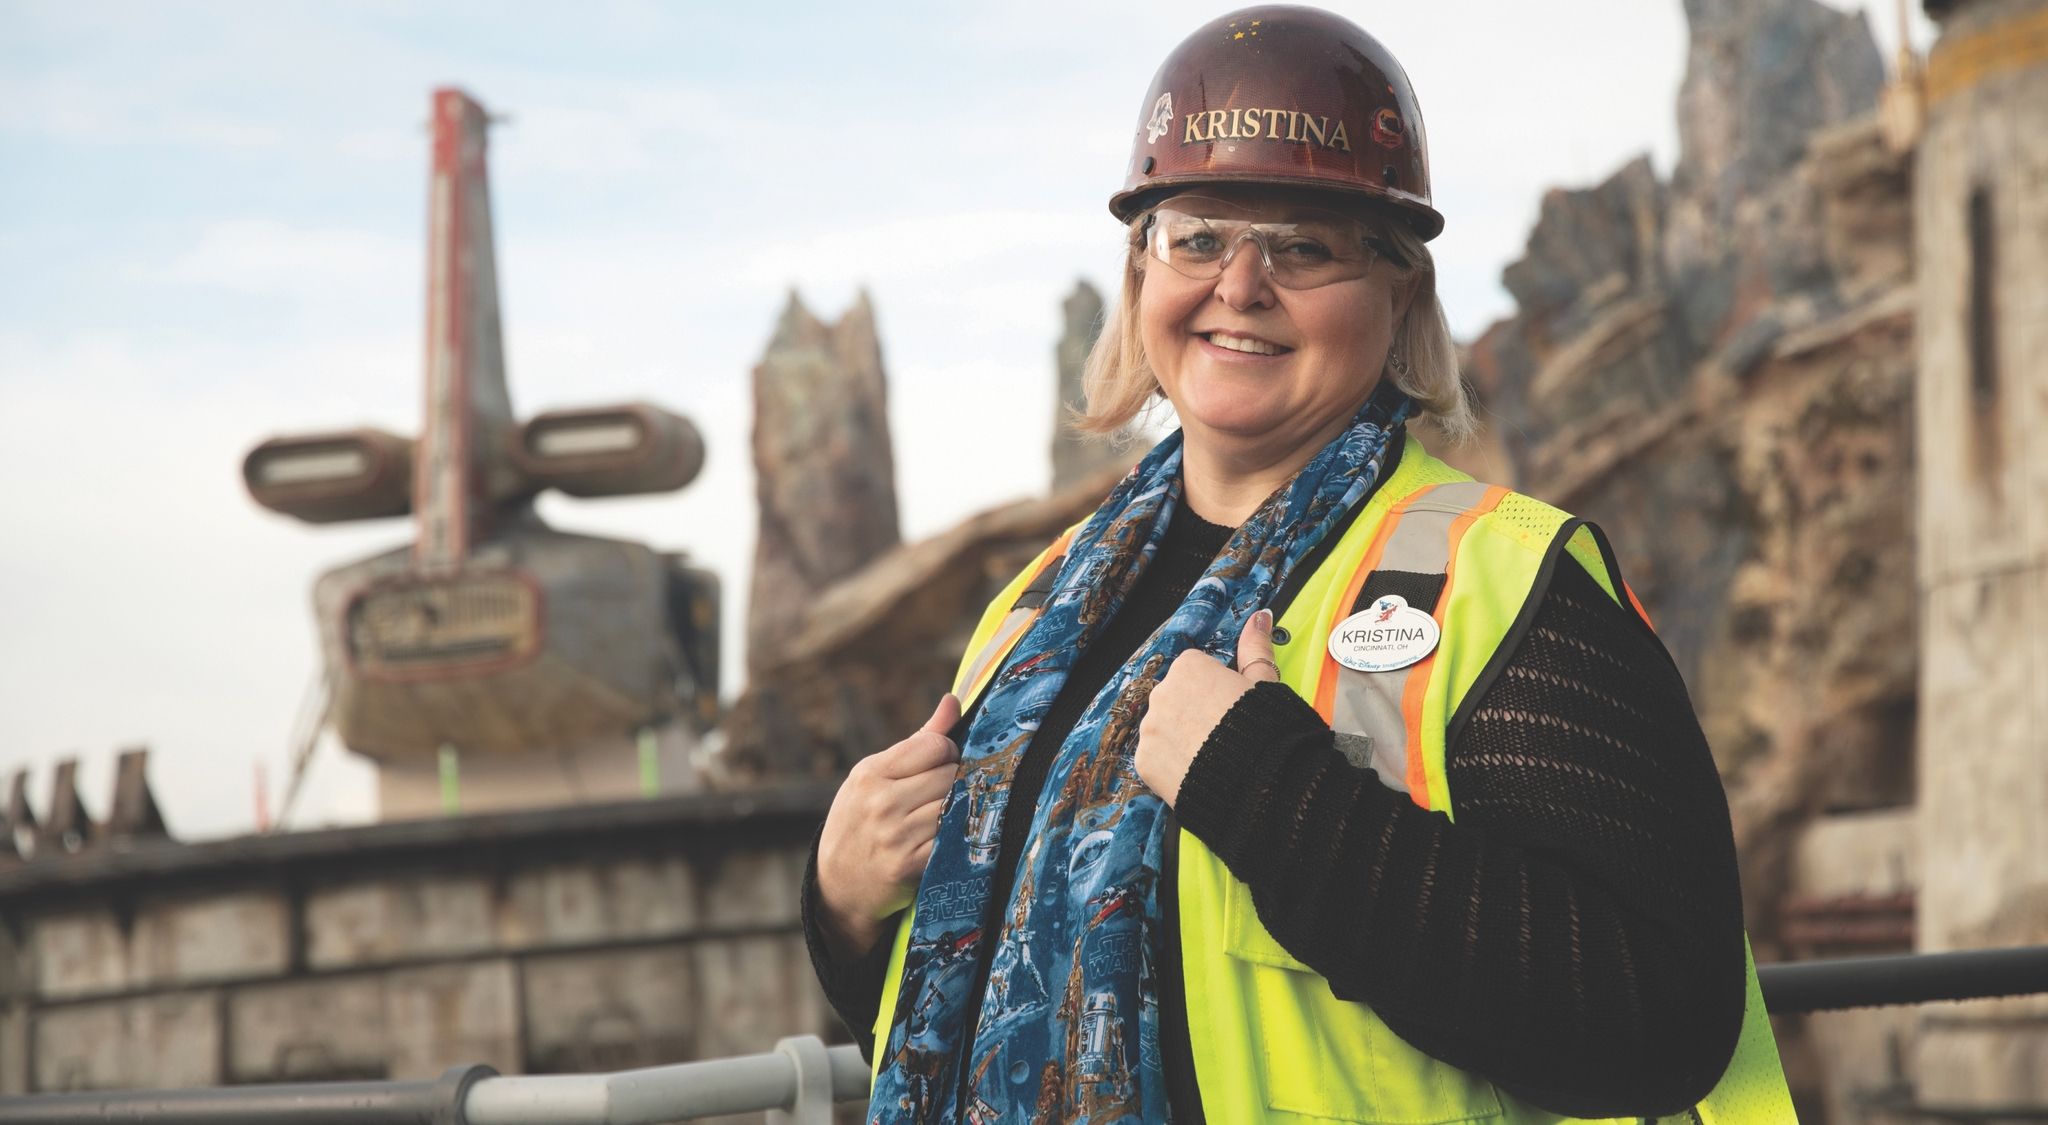 One Day At Disney Kristina Dewberry: Imagineering Construction Manager on Disney Plus February 2020